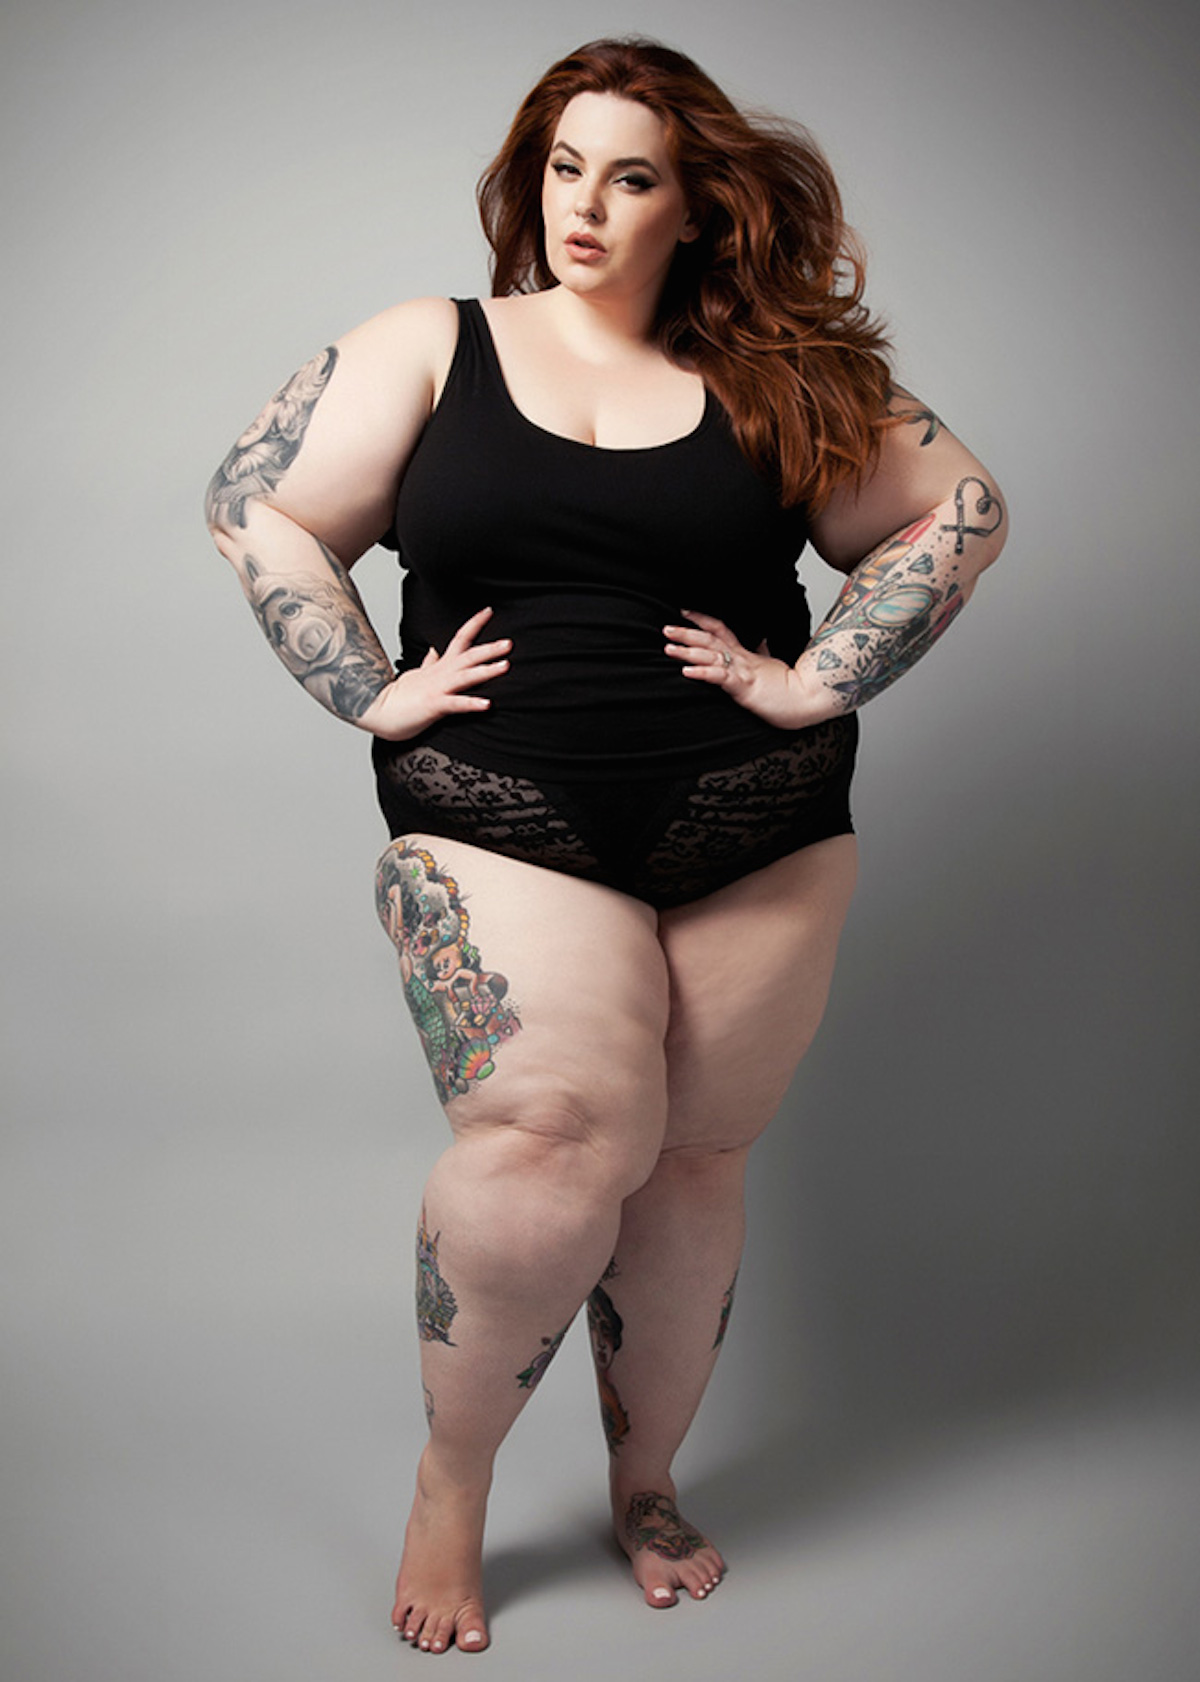 Pictures Of Plus Size Models voice chat